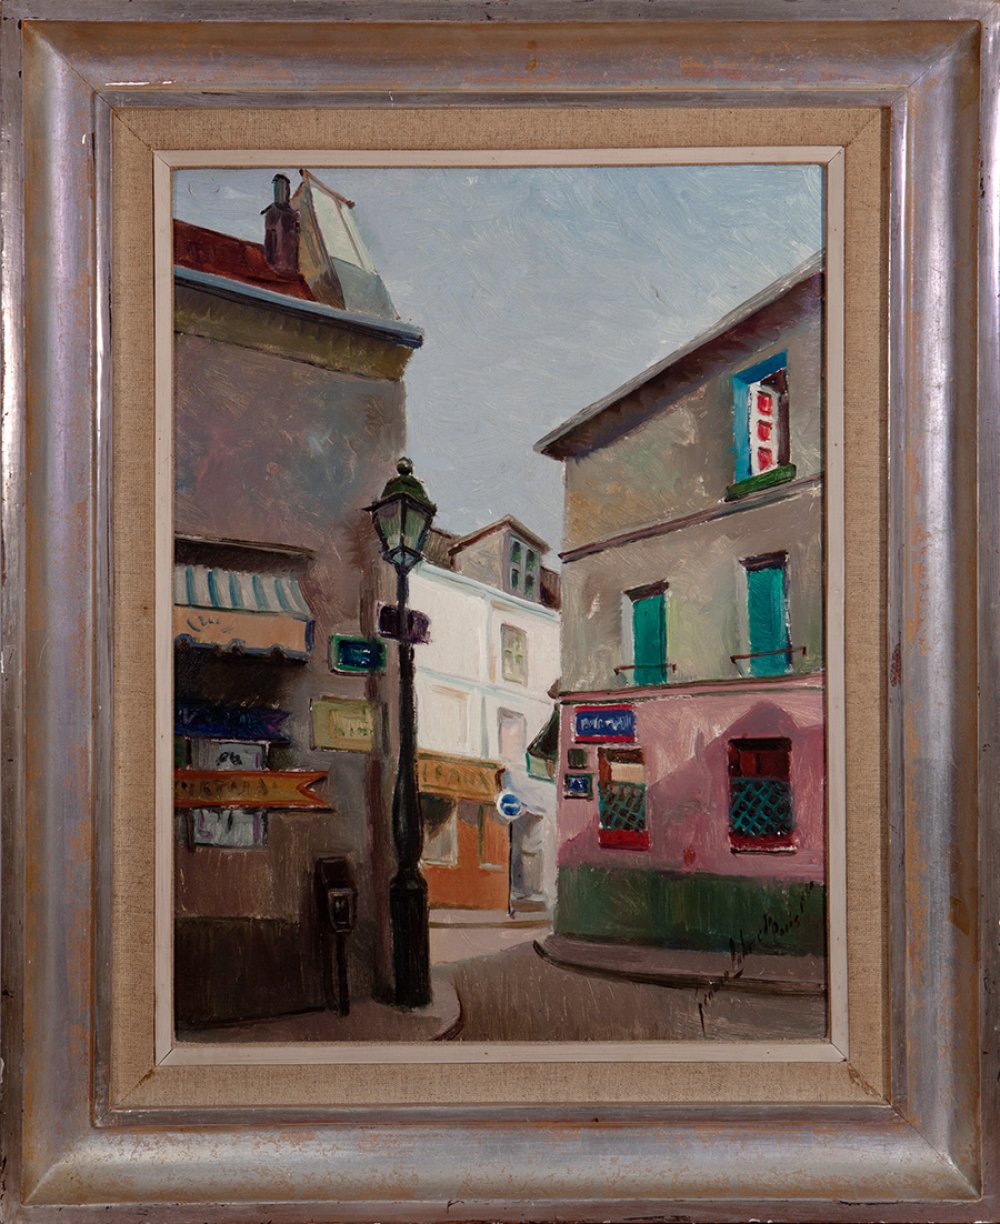 GENARO LAHUERTA (Valencia, 1905-1985)."Paris Street" 1960.Oil on canvas.Signed and dated in the - Image 3 of 5